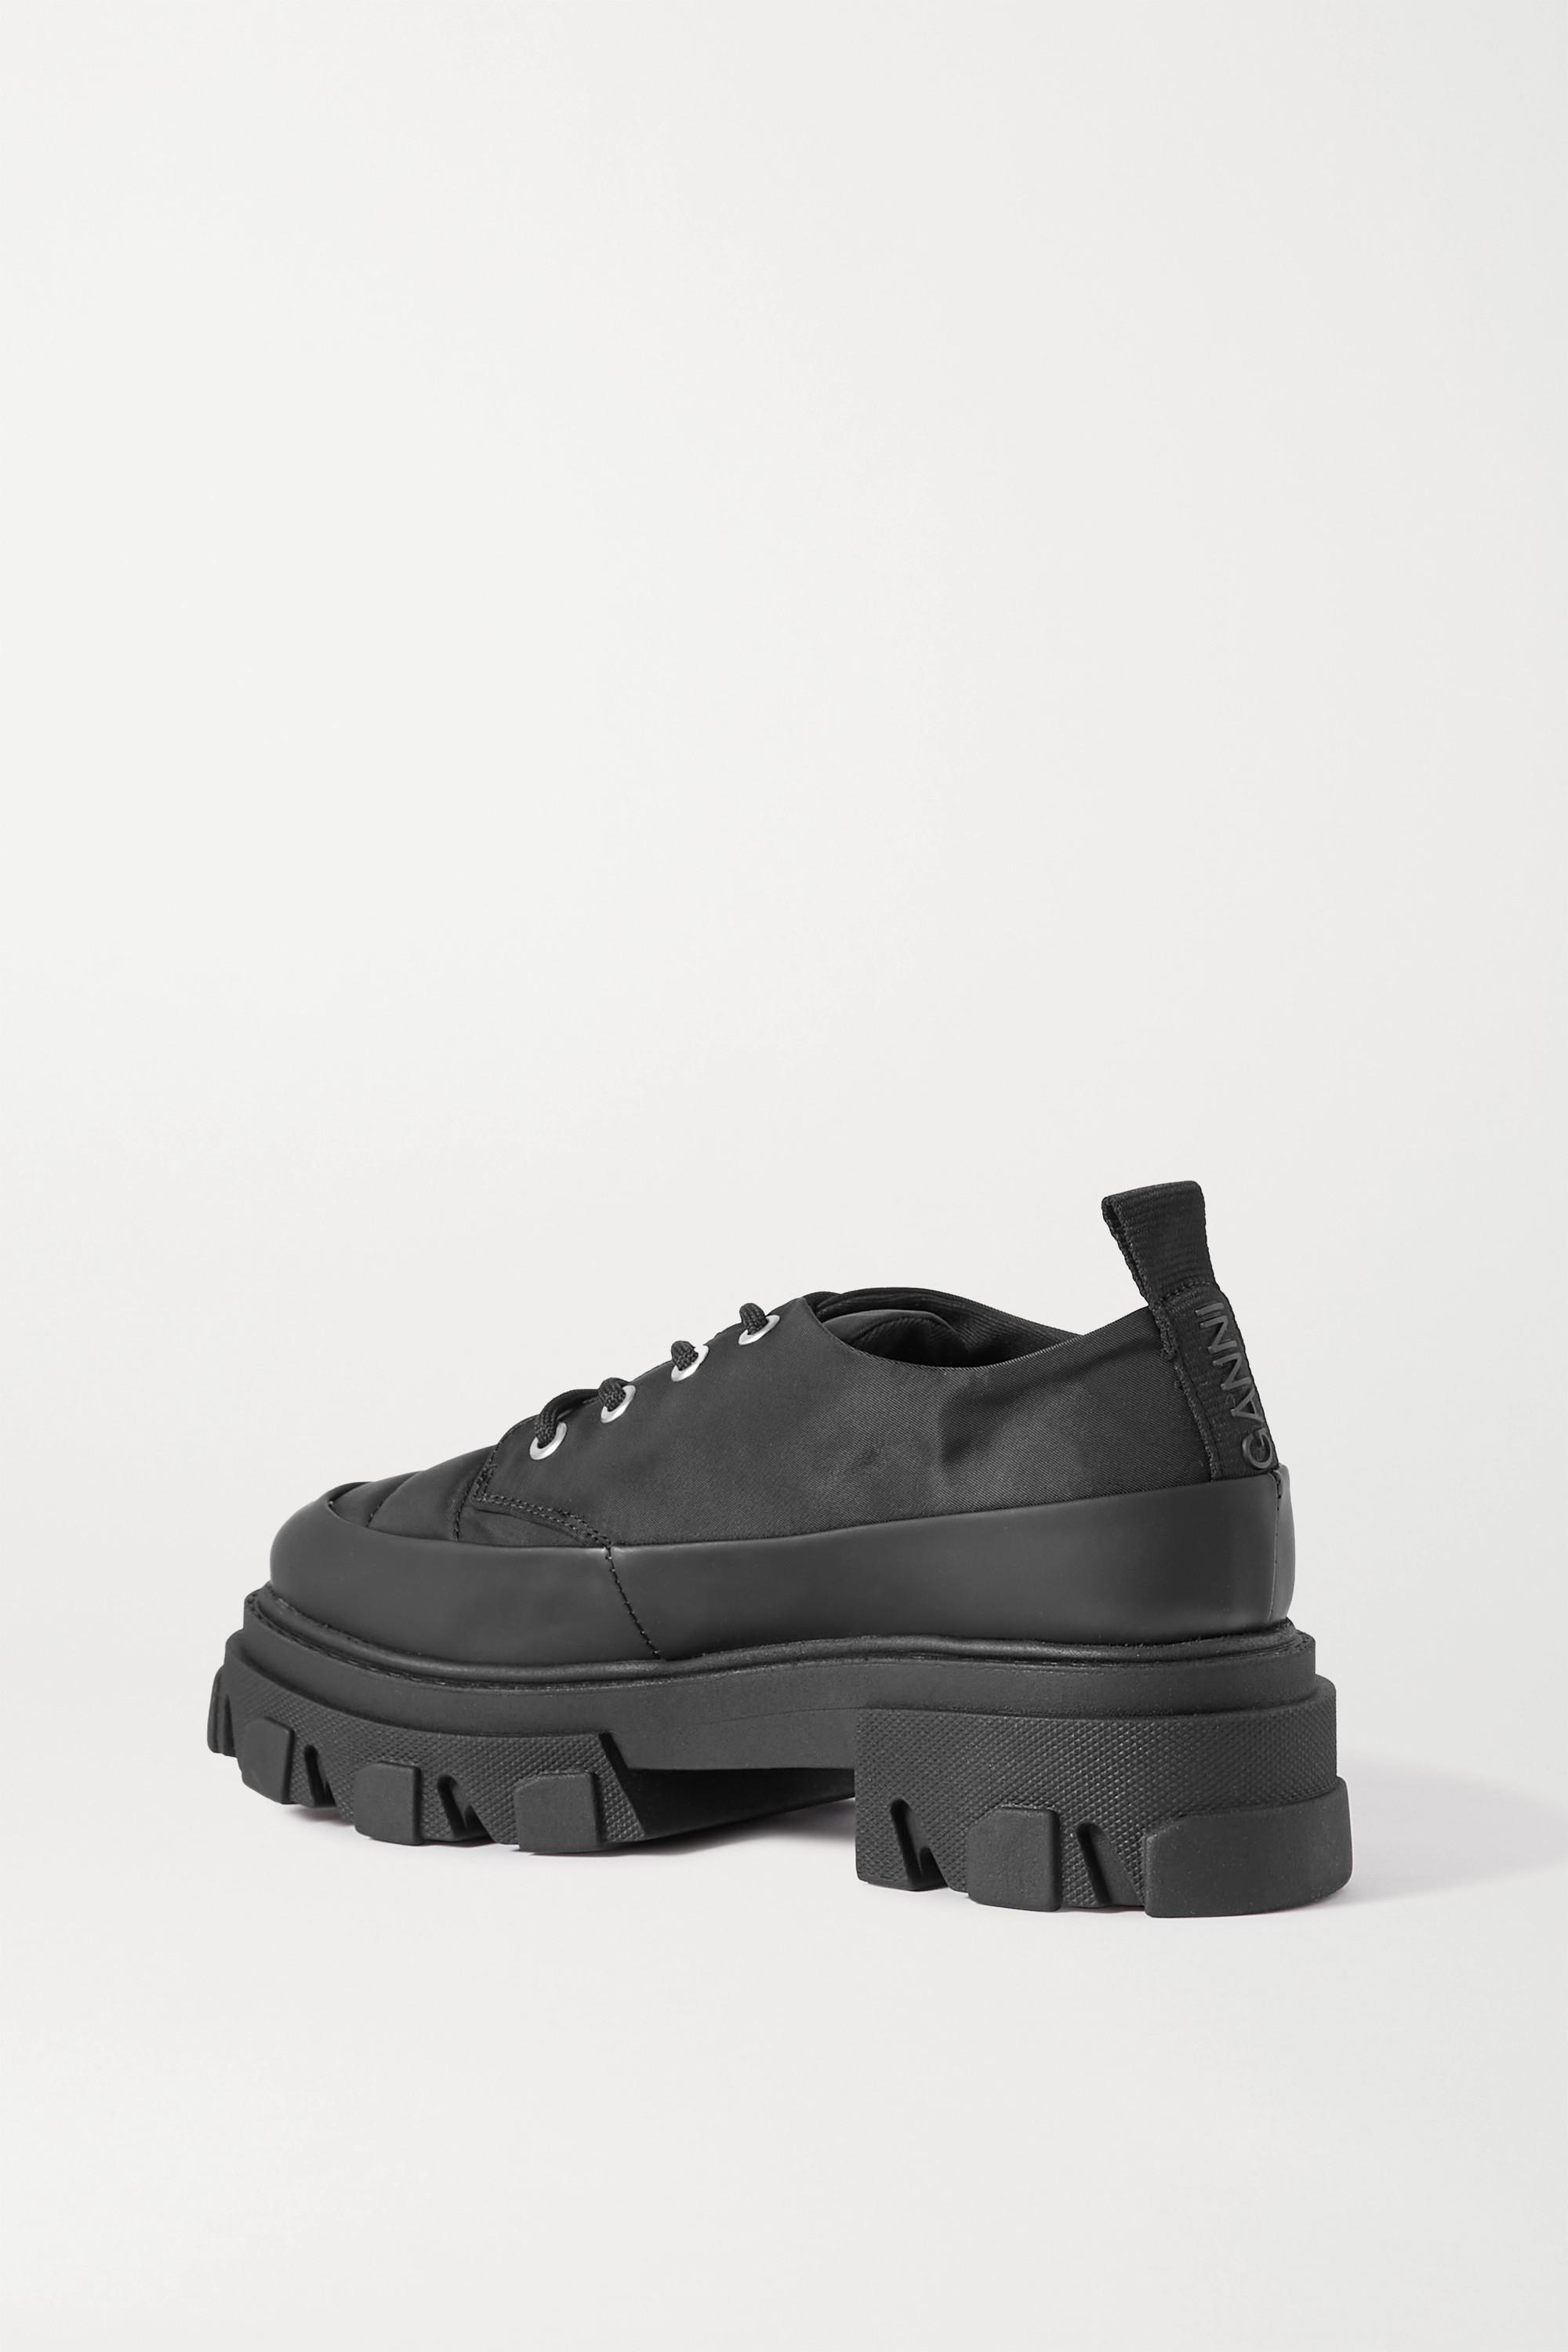 Ganni Rubber Shell Brogues in Black | Lyst